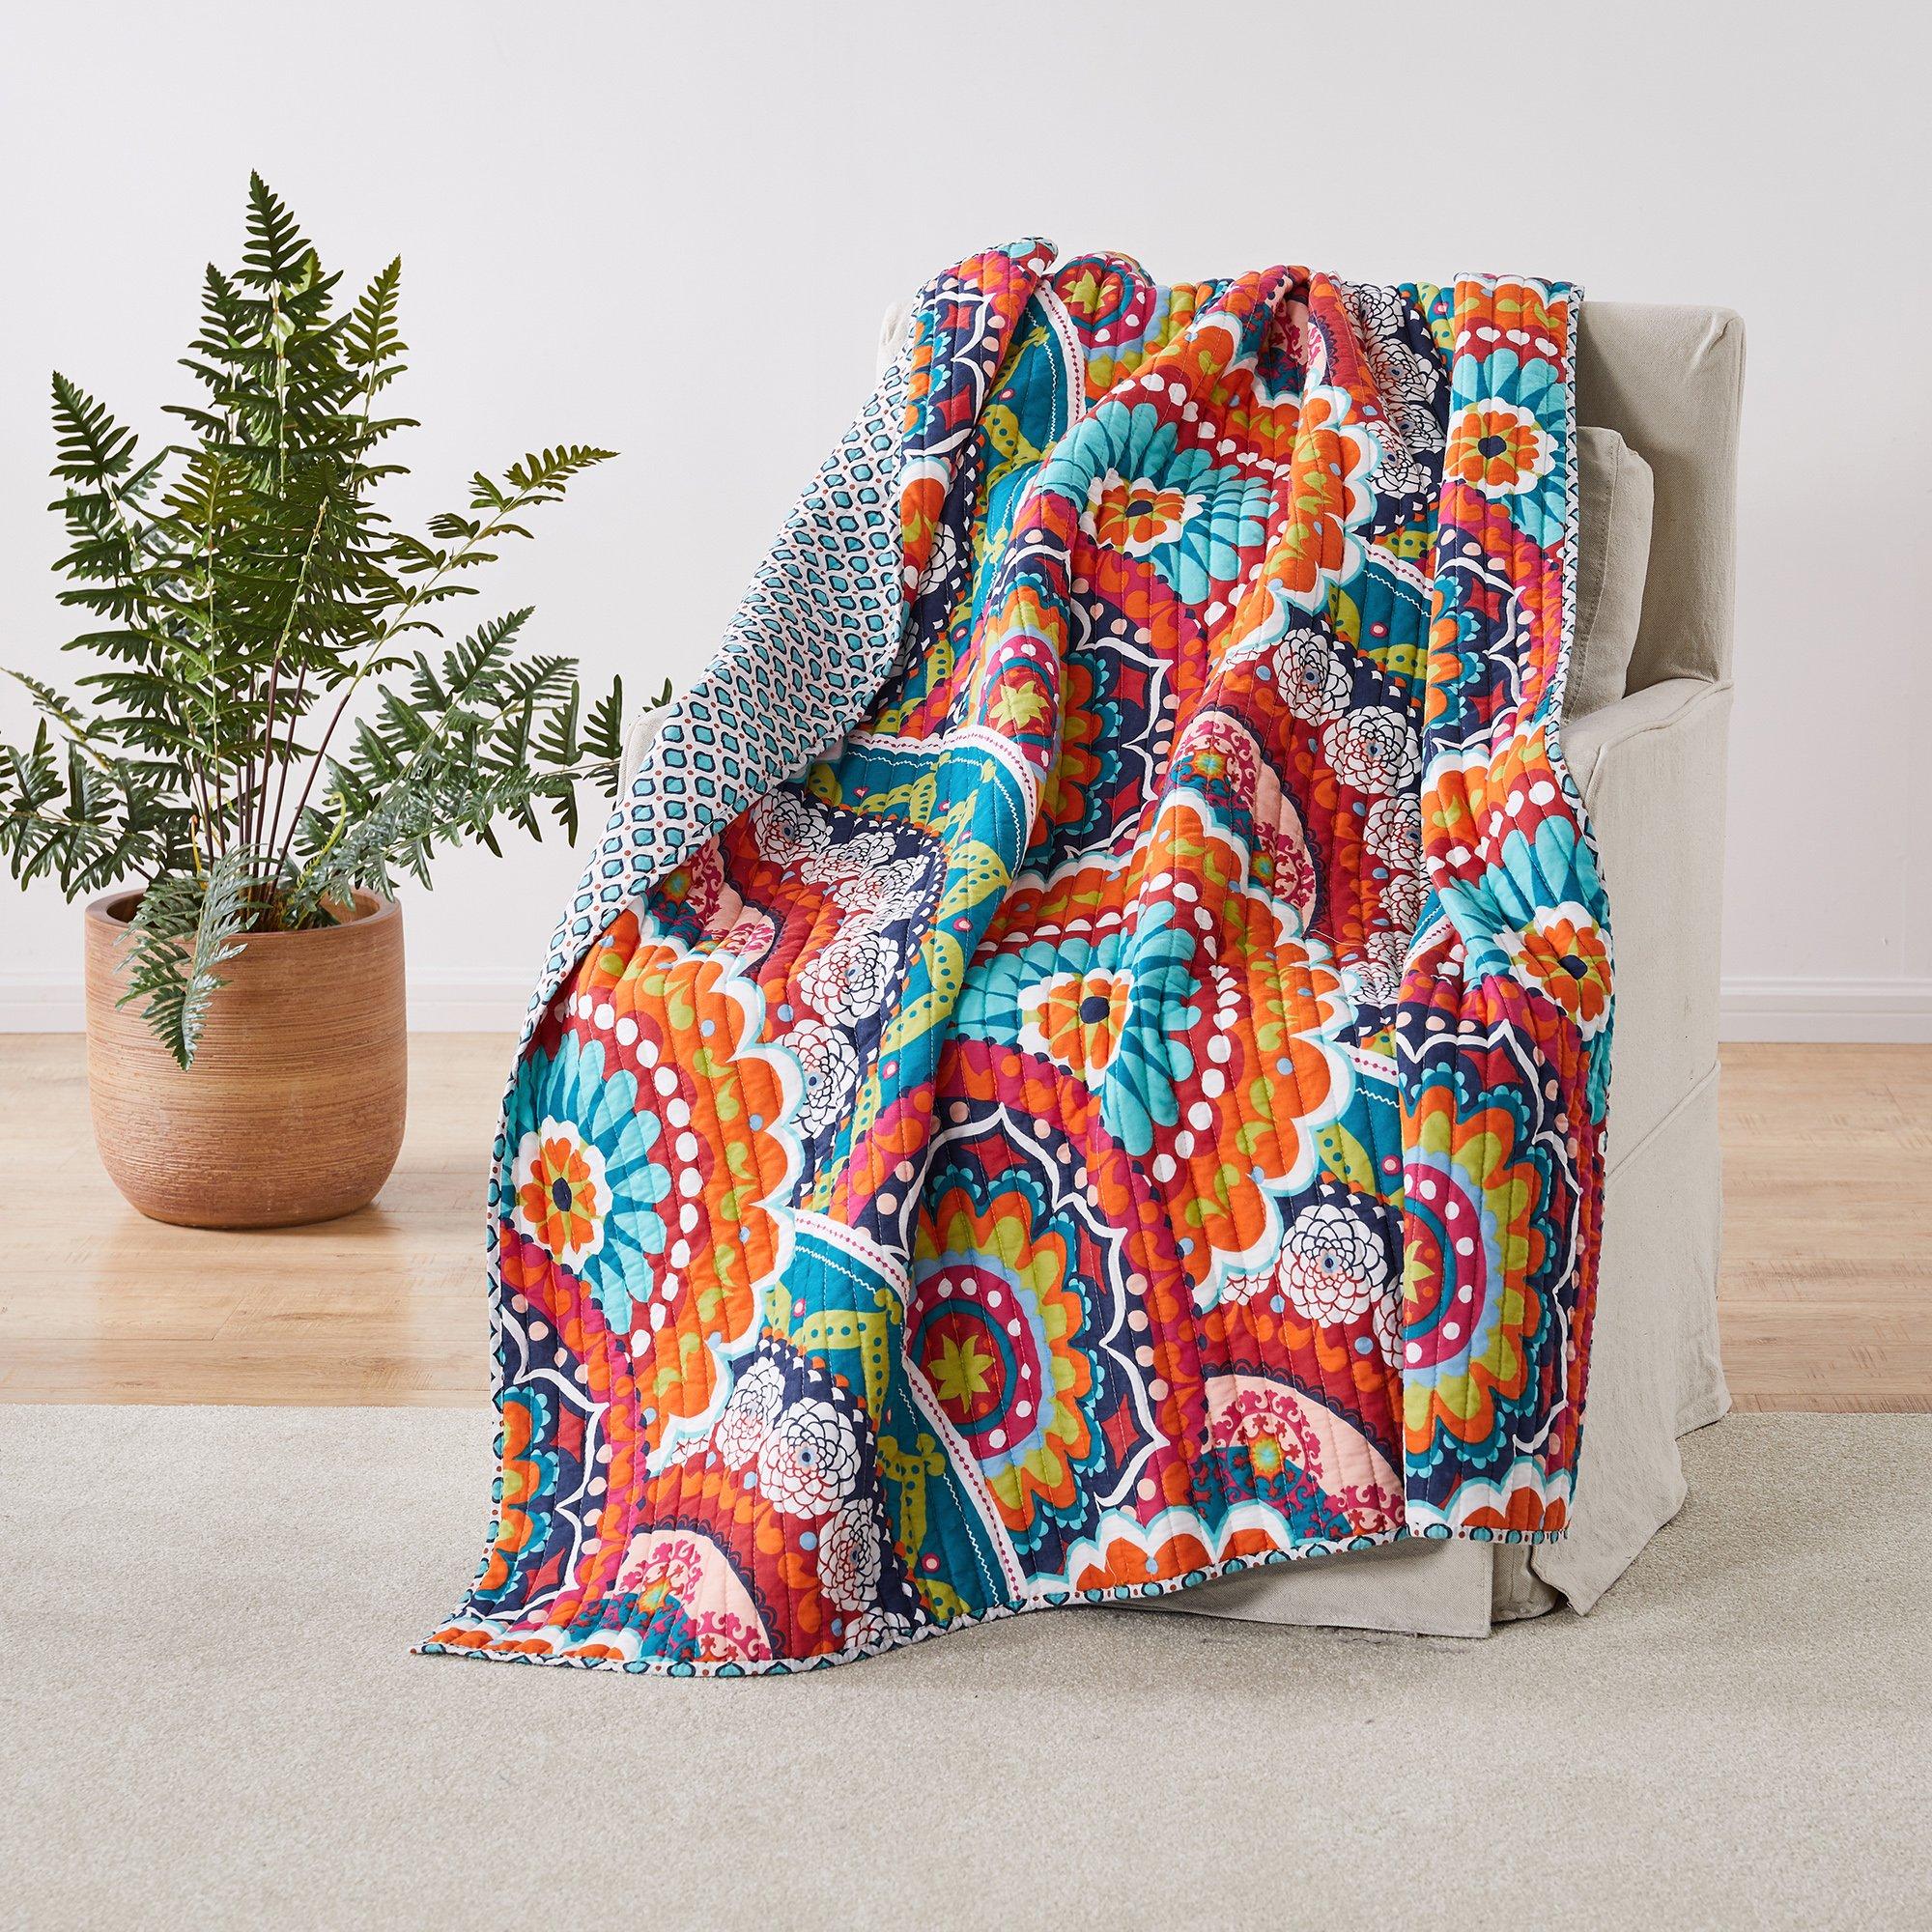 Levtex Home Serendipity Reversible Quilted Throw